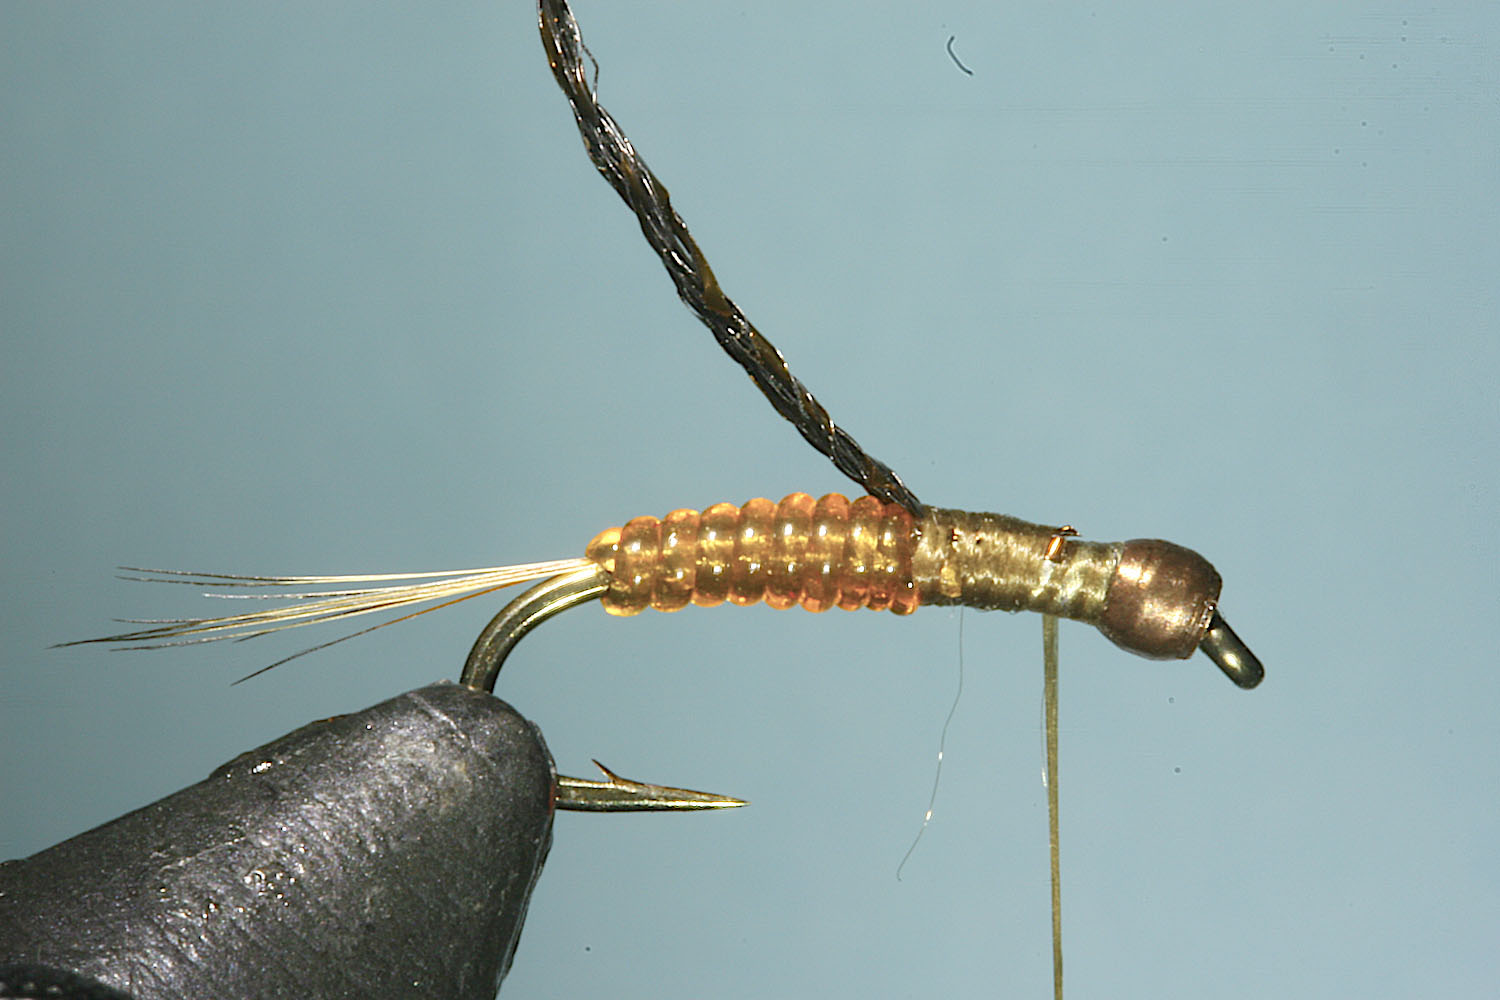 Step 6 of tying sequence for jelly crimp nymph fly